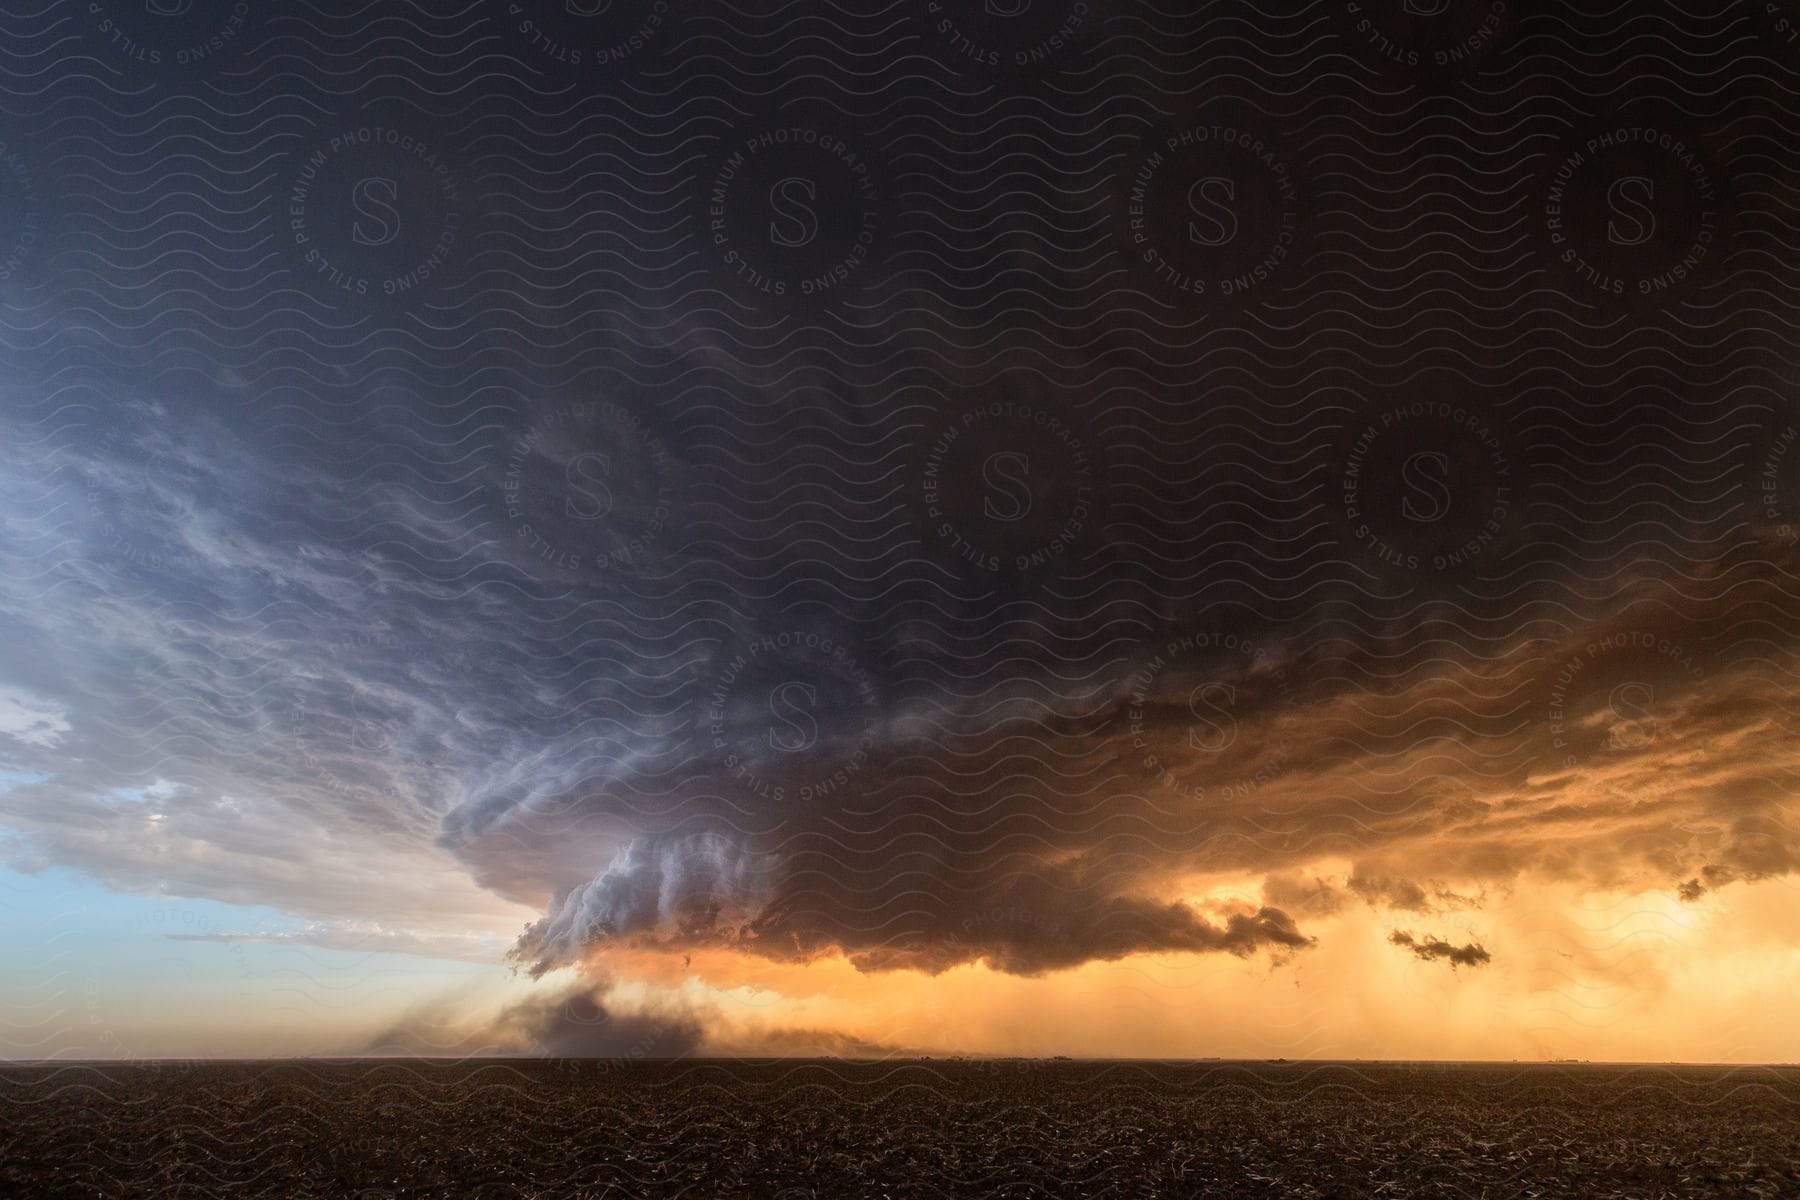 A supercell storm cloud hangs over farmland in an orange sky